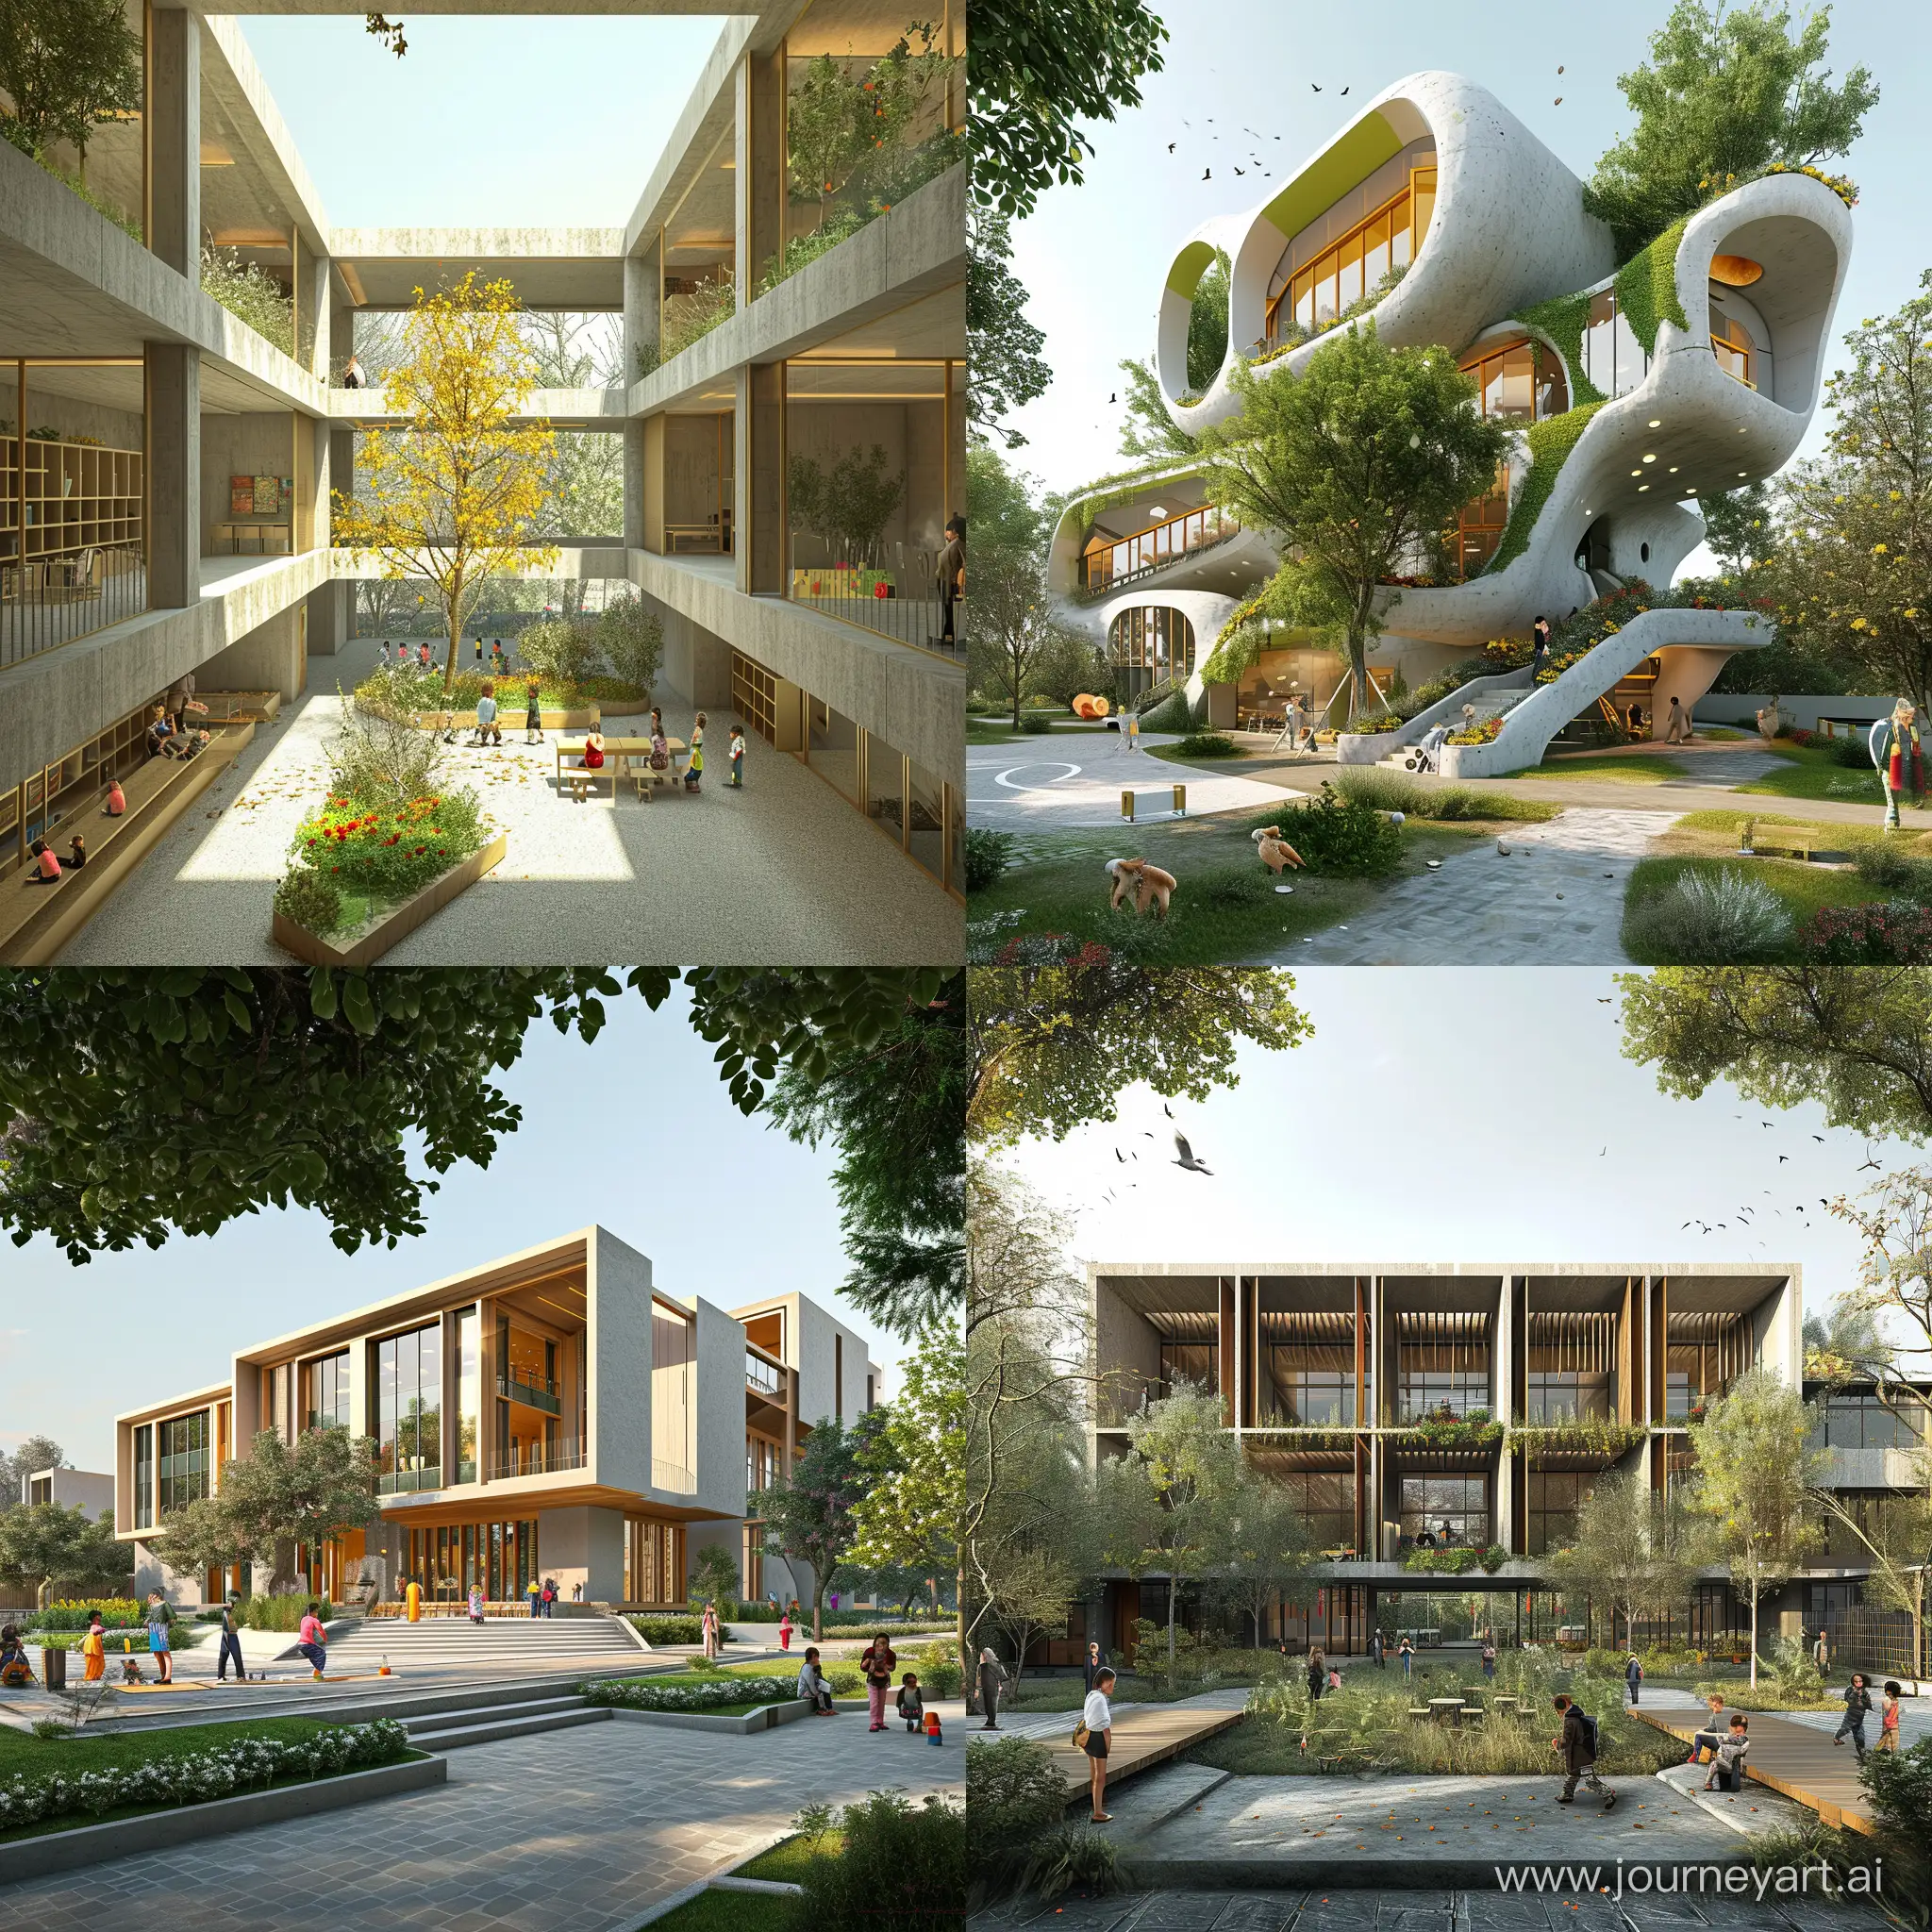 The design of a three-story school for working children for the age of 6 to 12 years with a sense of belonging to a place in Tehran, combined with green space with modern architecture